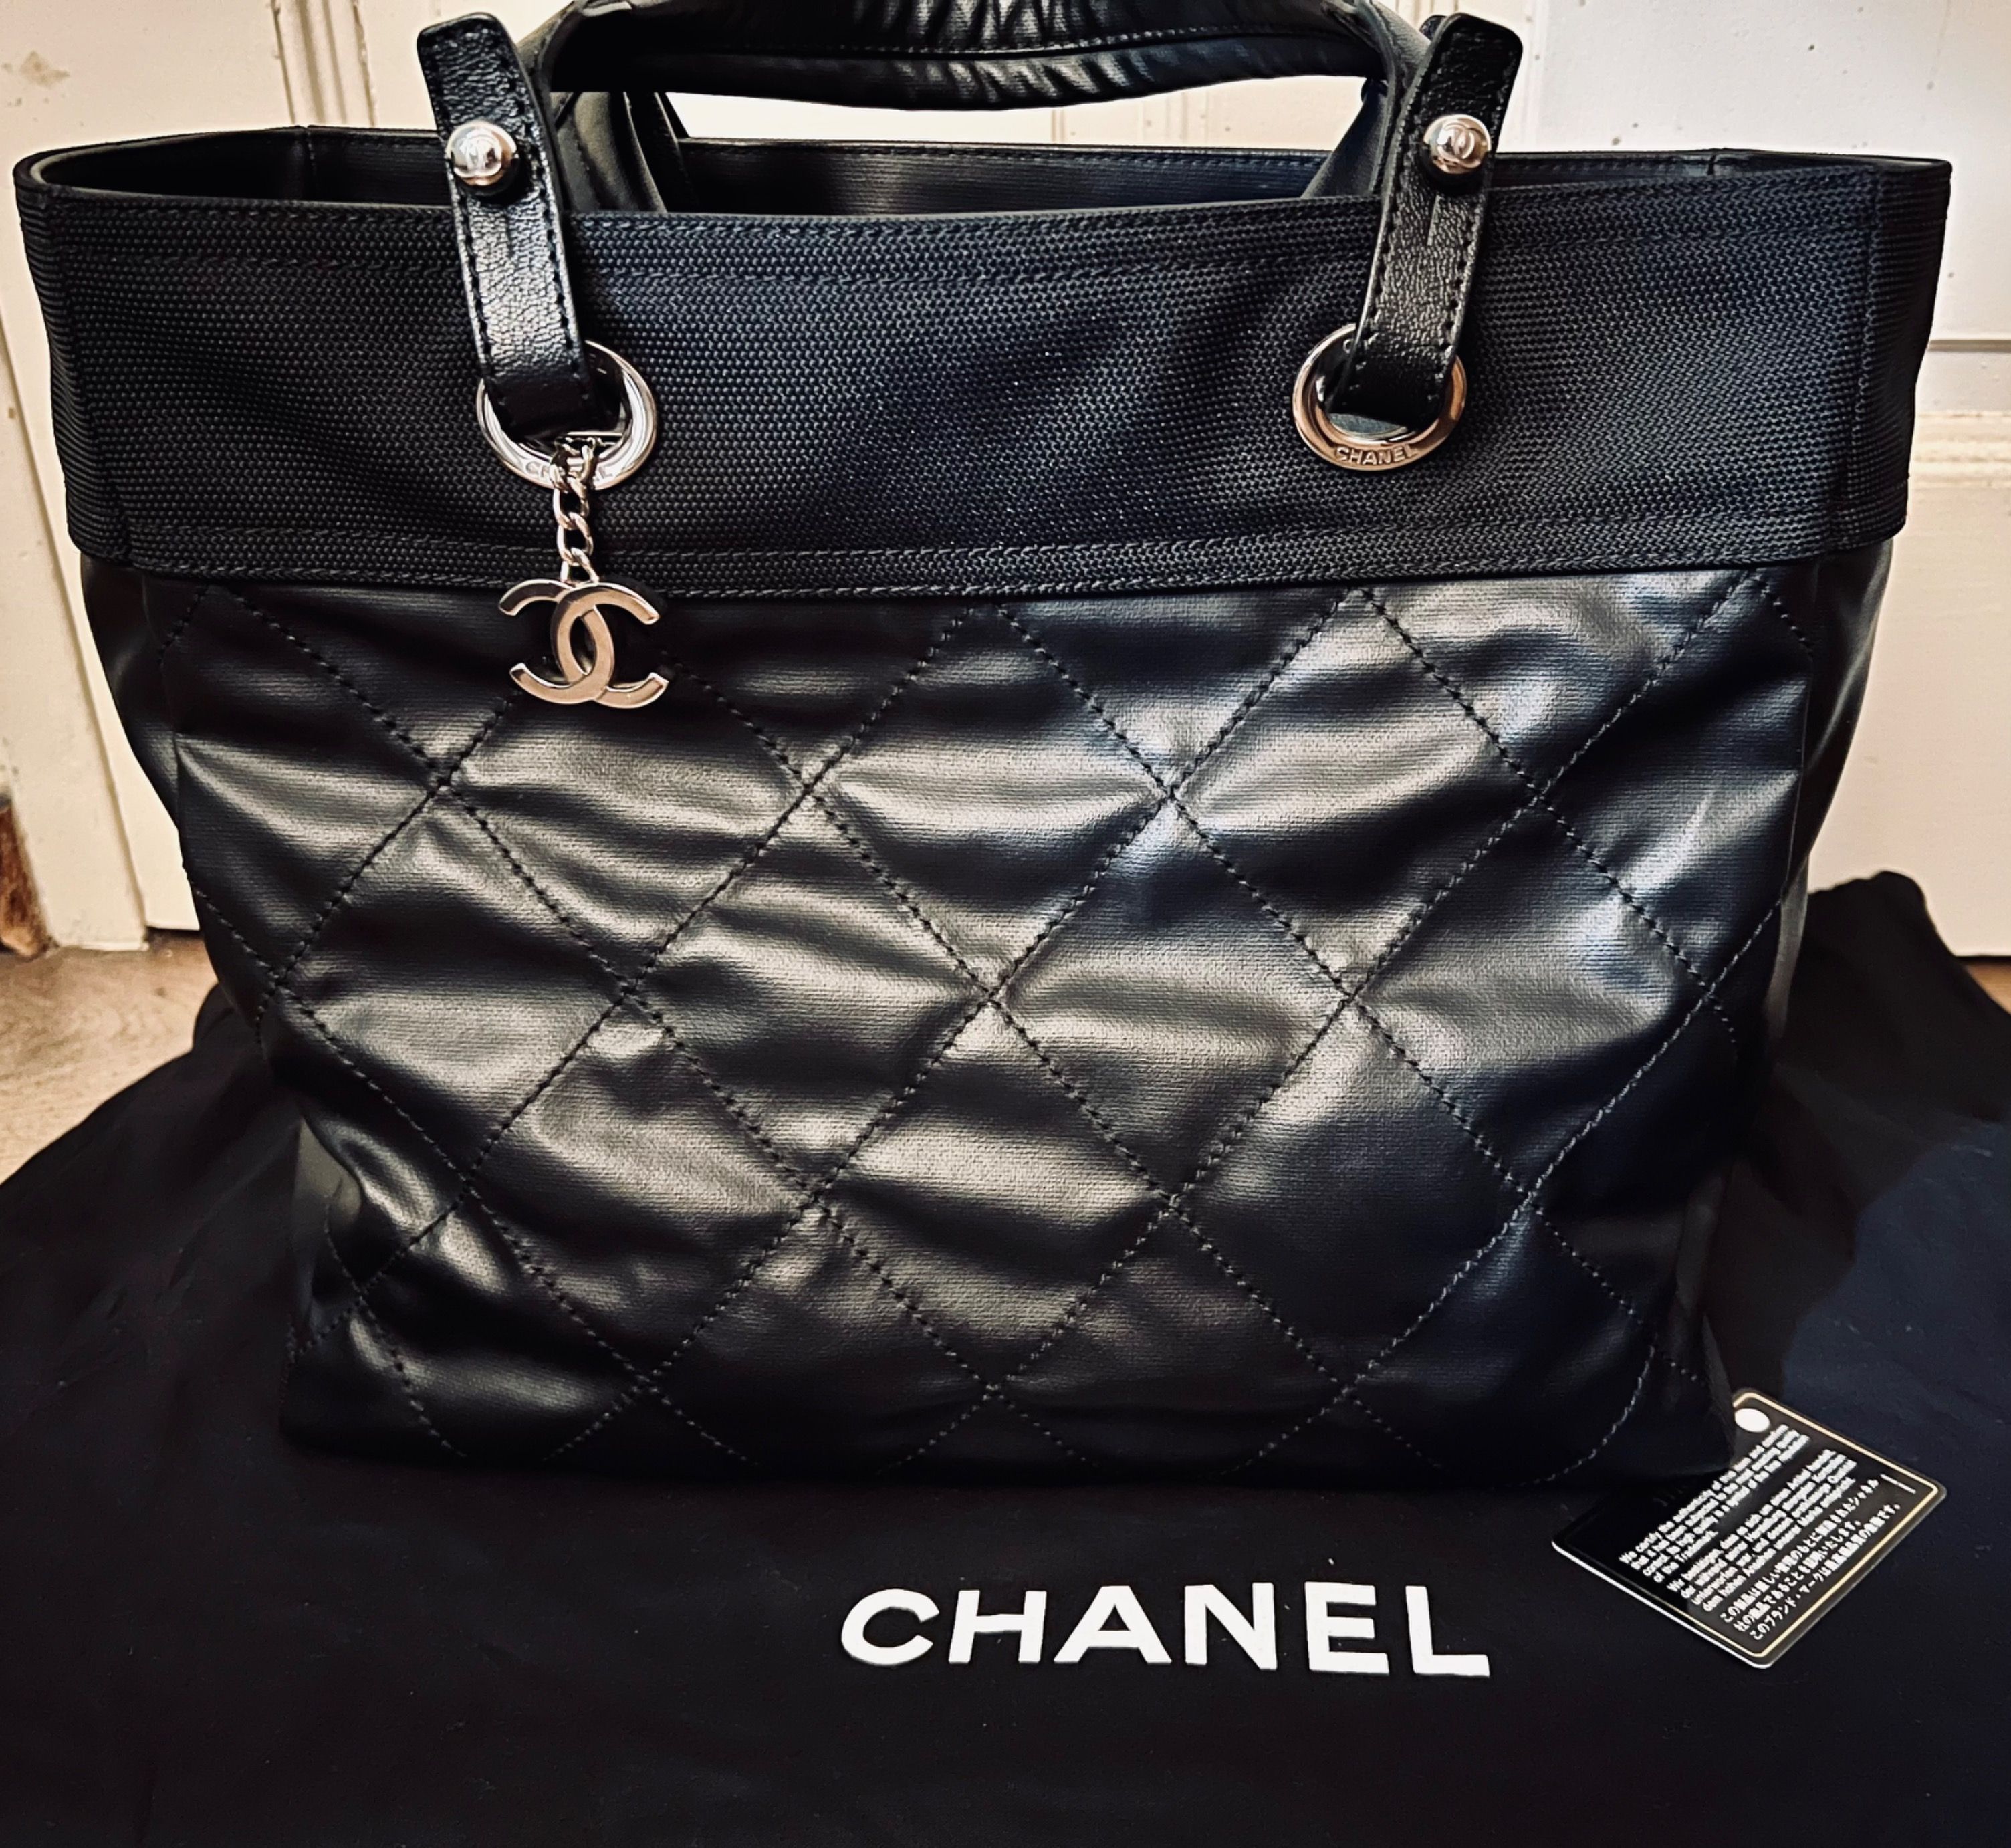 Chanel Paris-Biarritz Tote Bag in Black Quilted Canvas, Leather and SHW